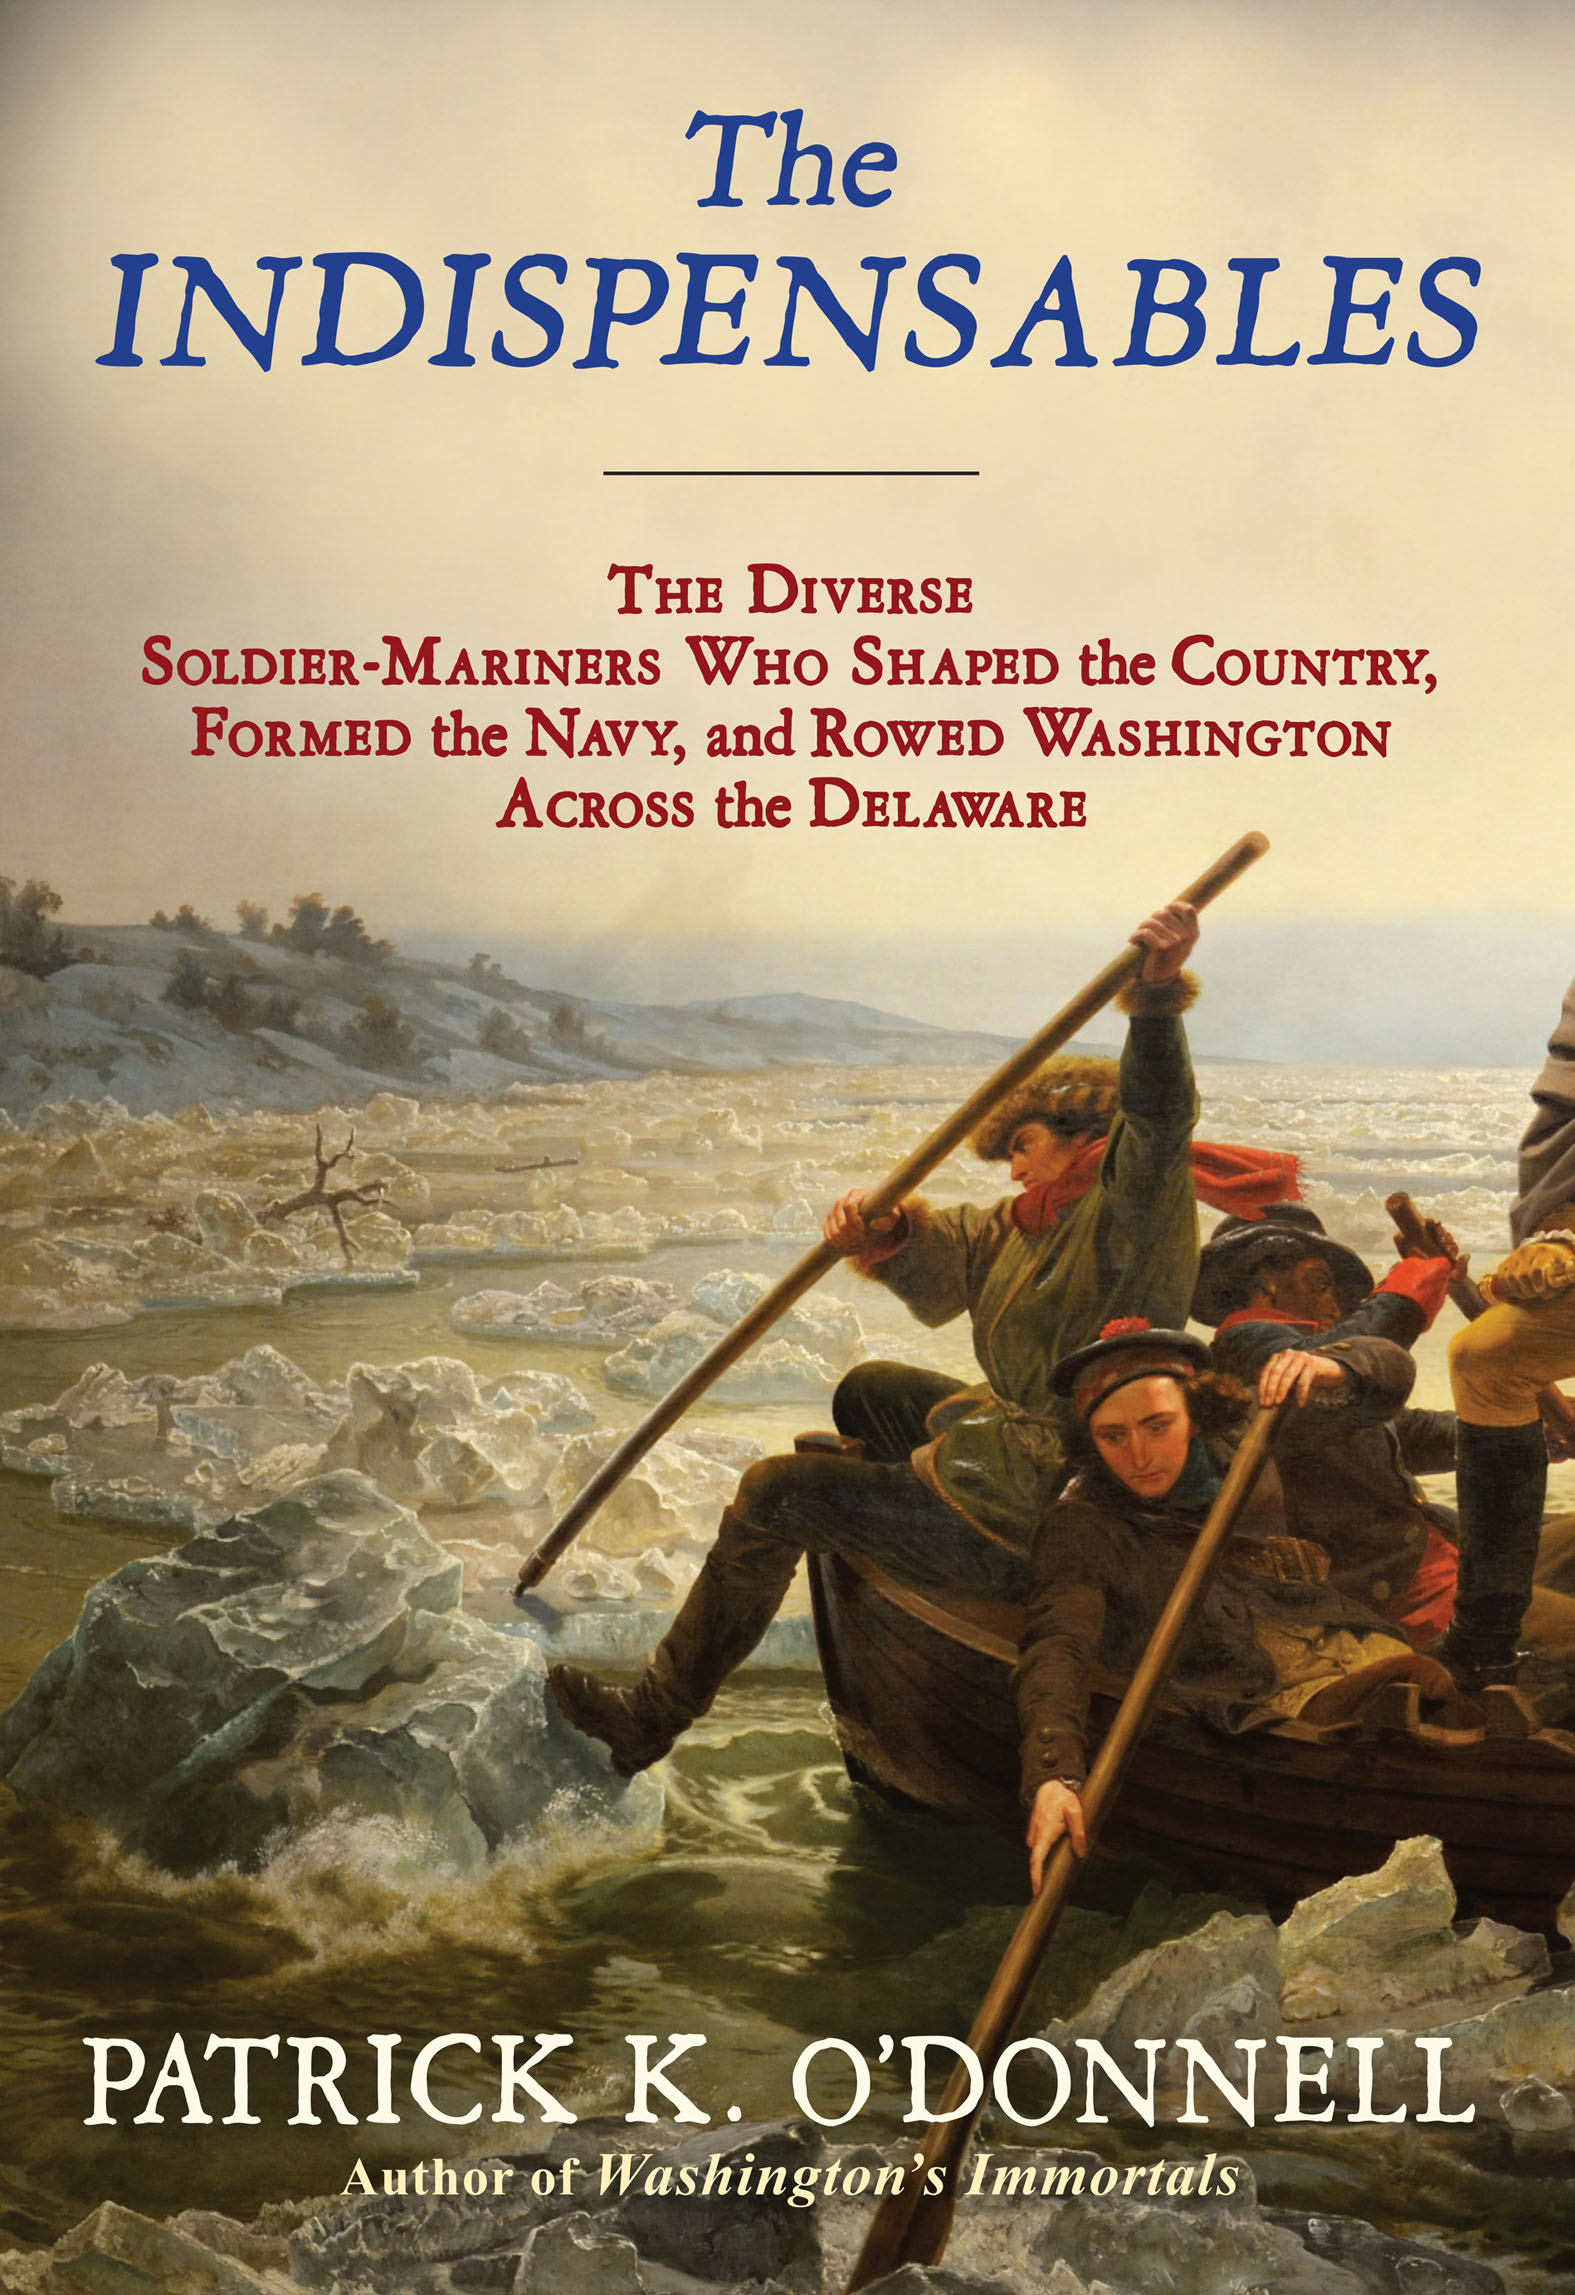 The Indispensables The Diverse Soldier-Mariners Who Shaped the Country, Formed the Navy, and Rowed Washington Across the Delaware cover image